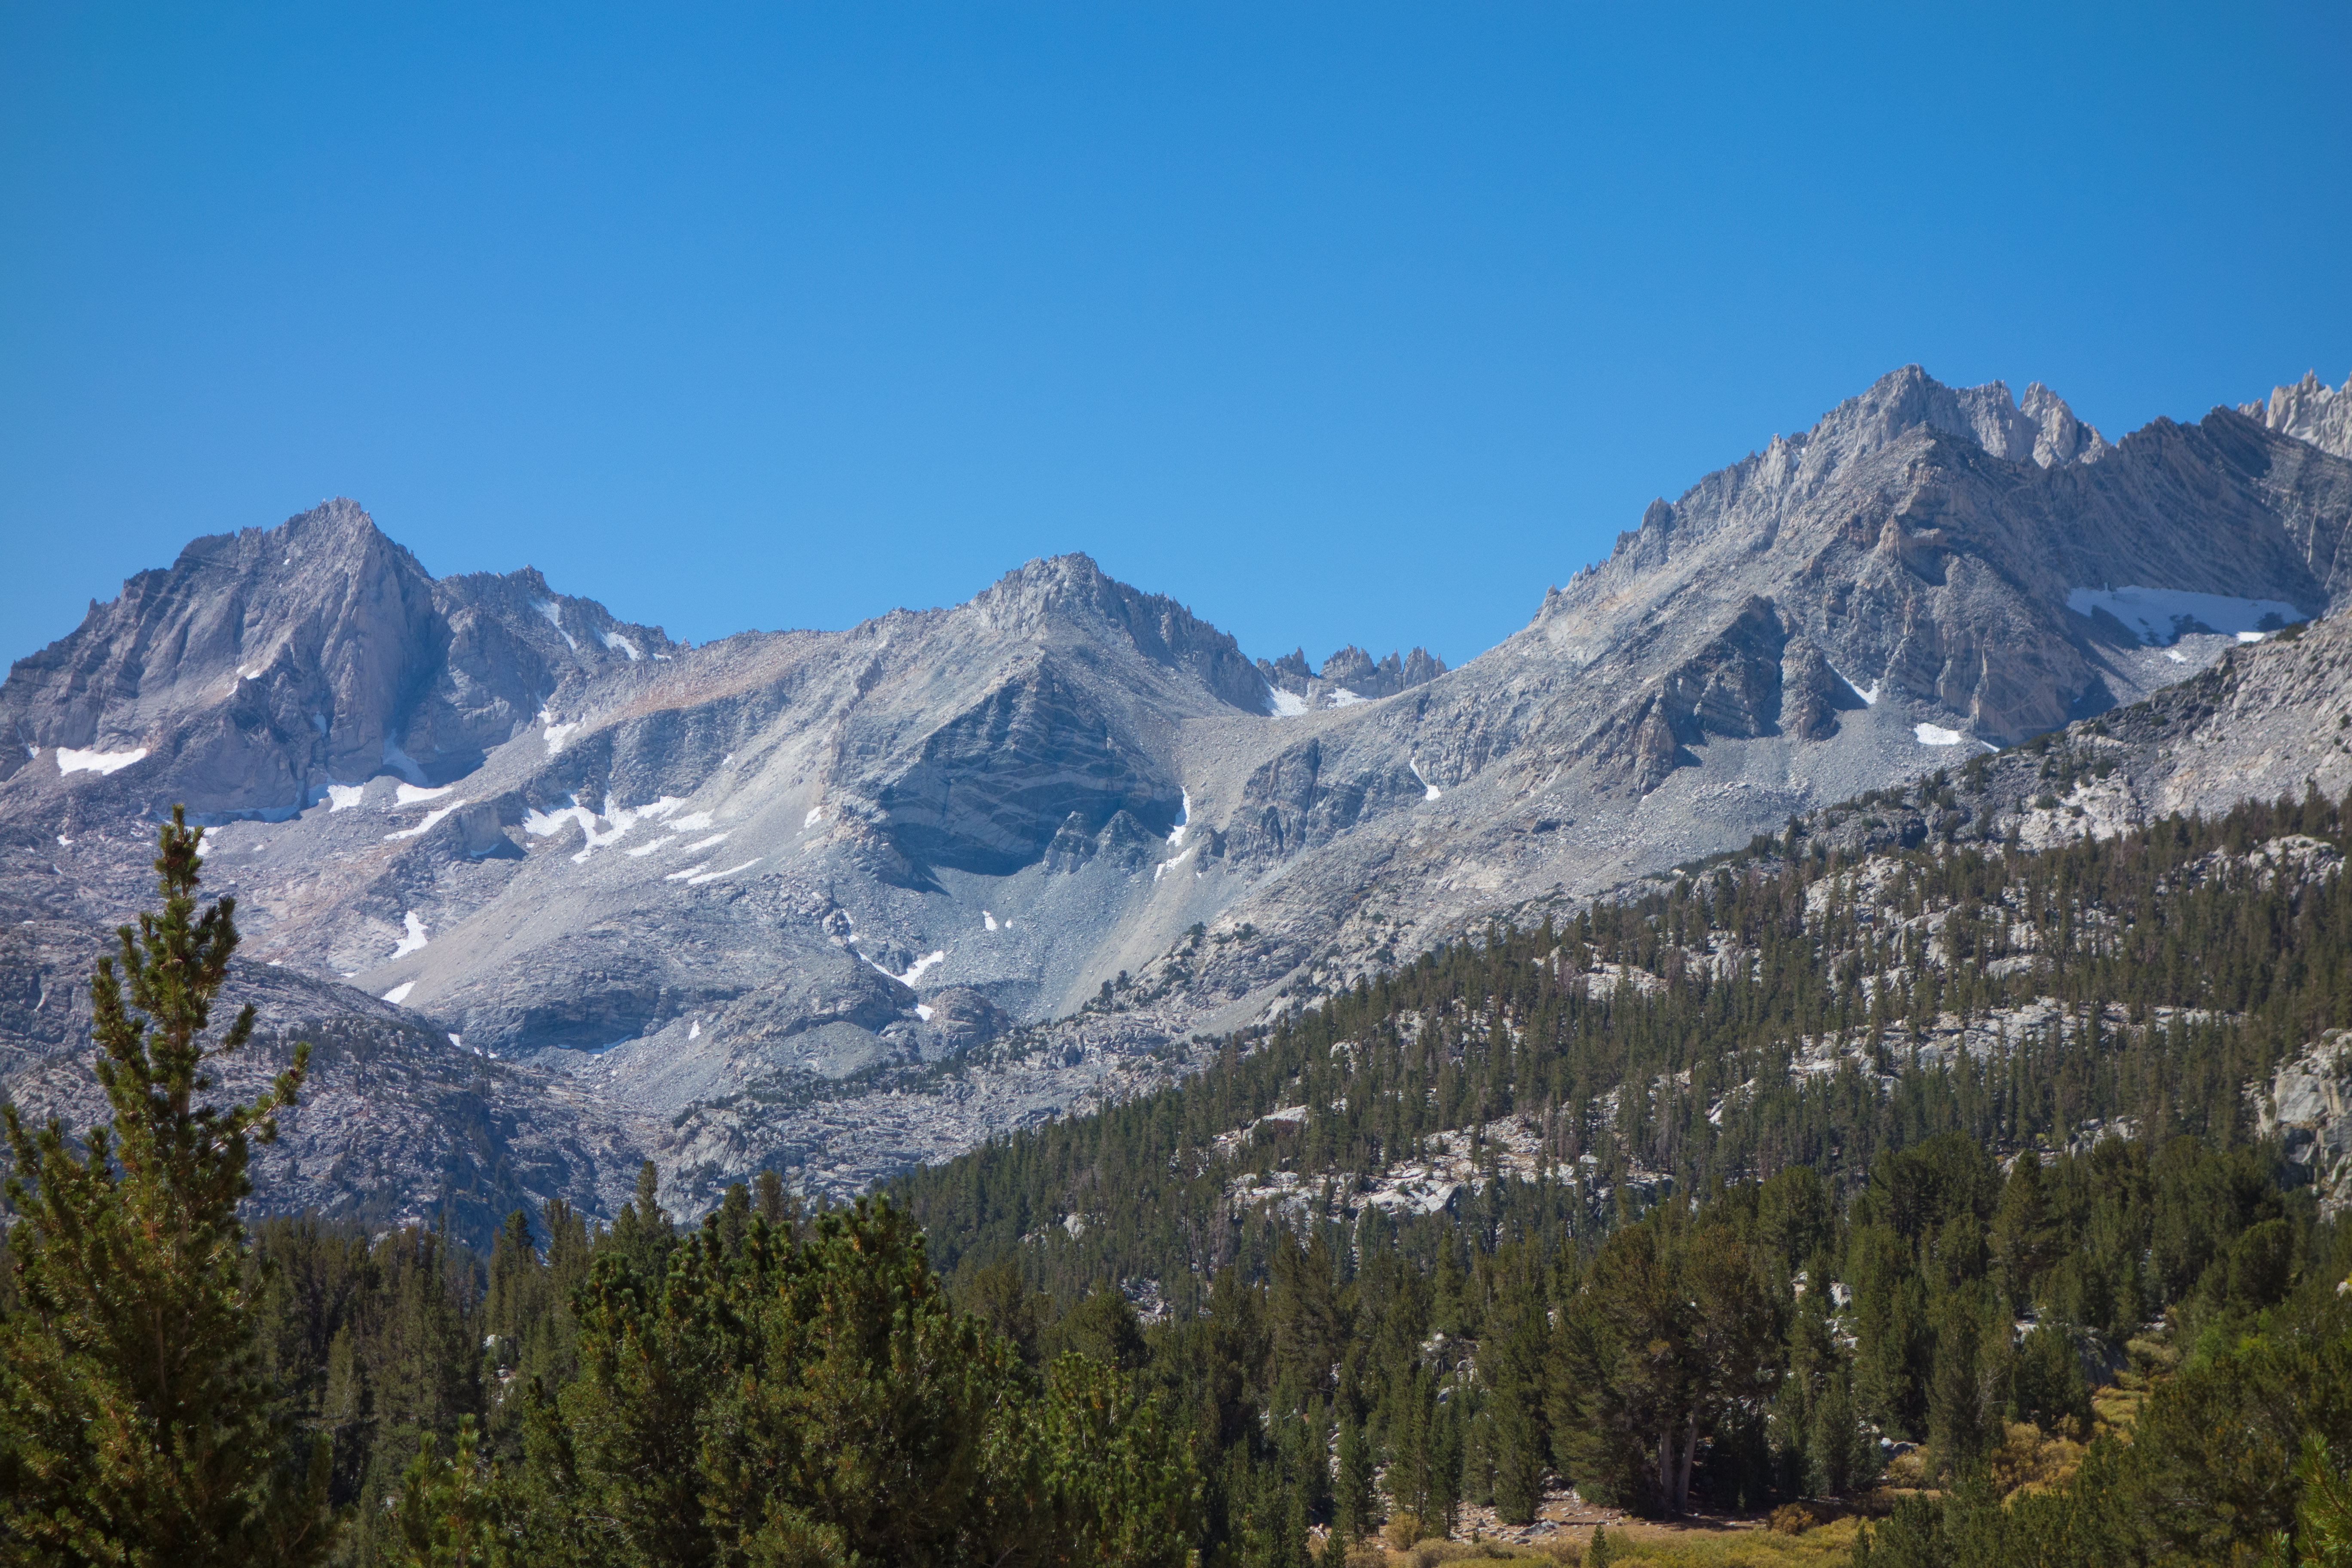 Peaks are (l to r) Bear Creek Spire, Pipsqueak Spire, and Mt. Dade.